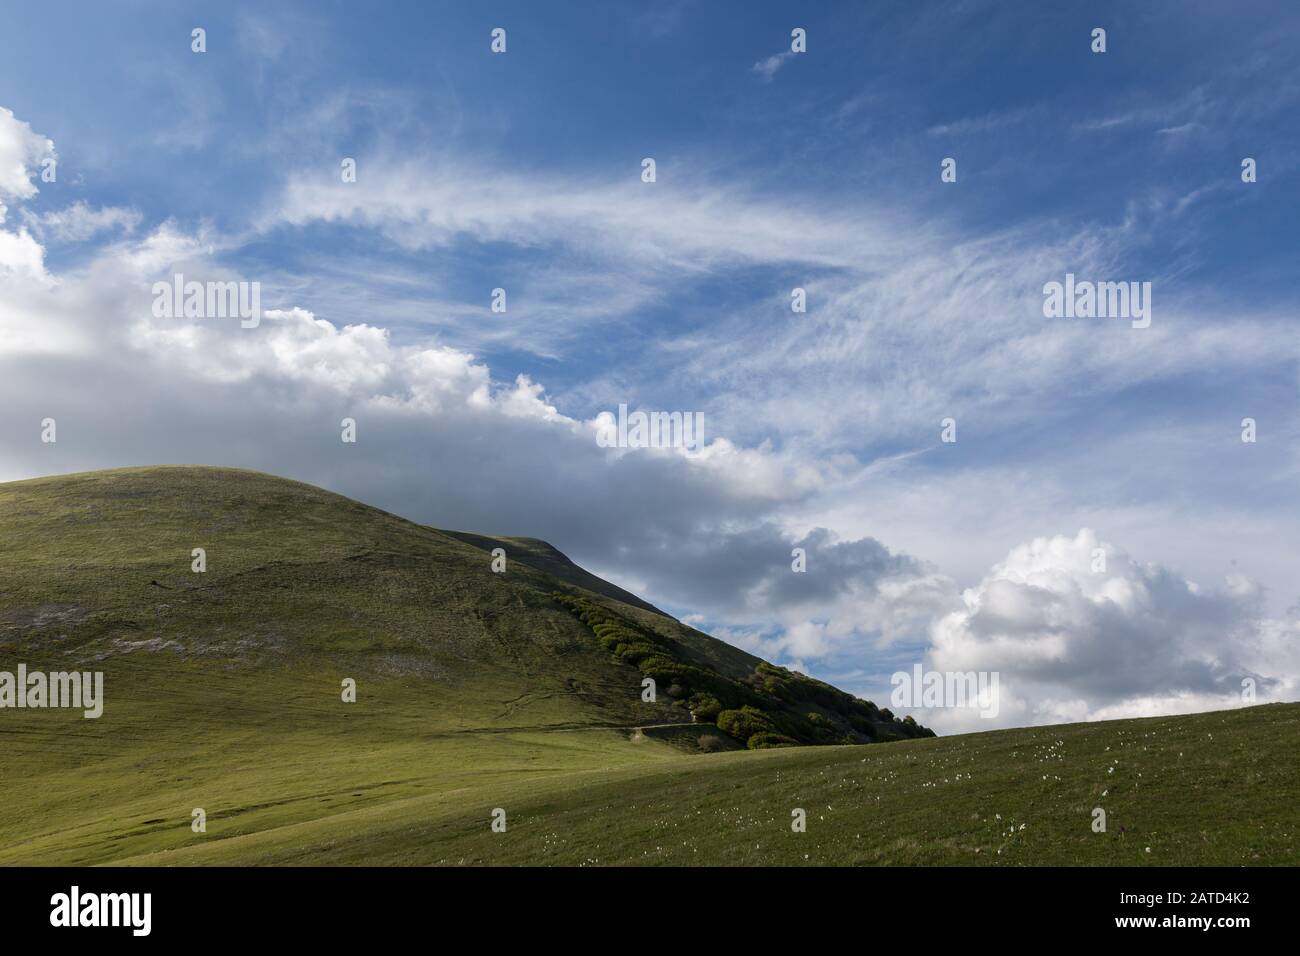 Mountains view in spring with green meadows and blue sky Stock Photo